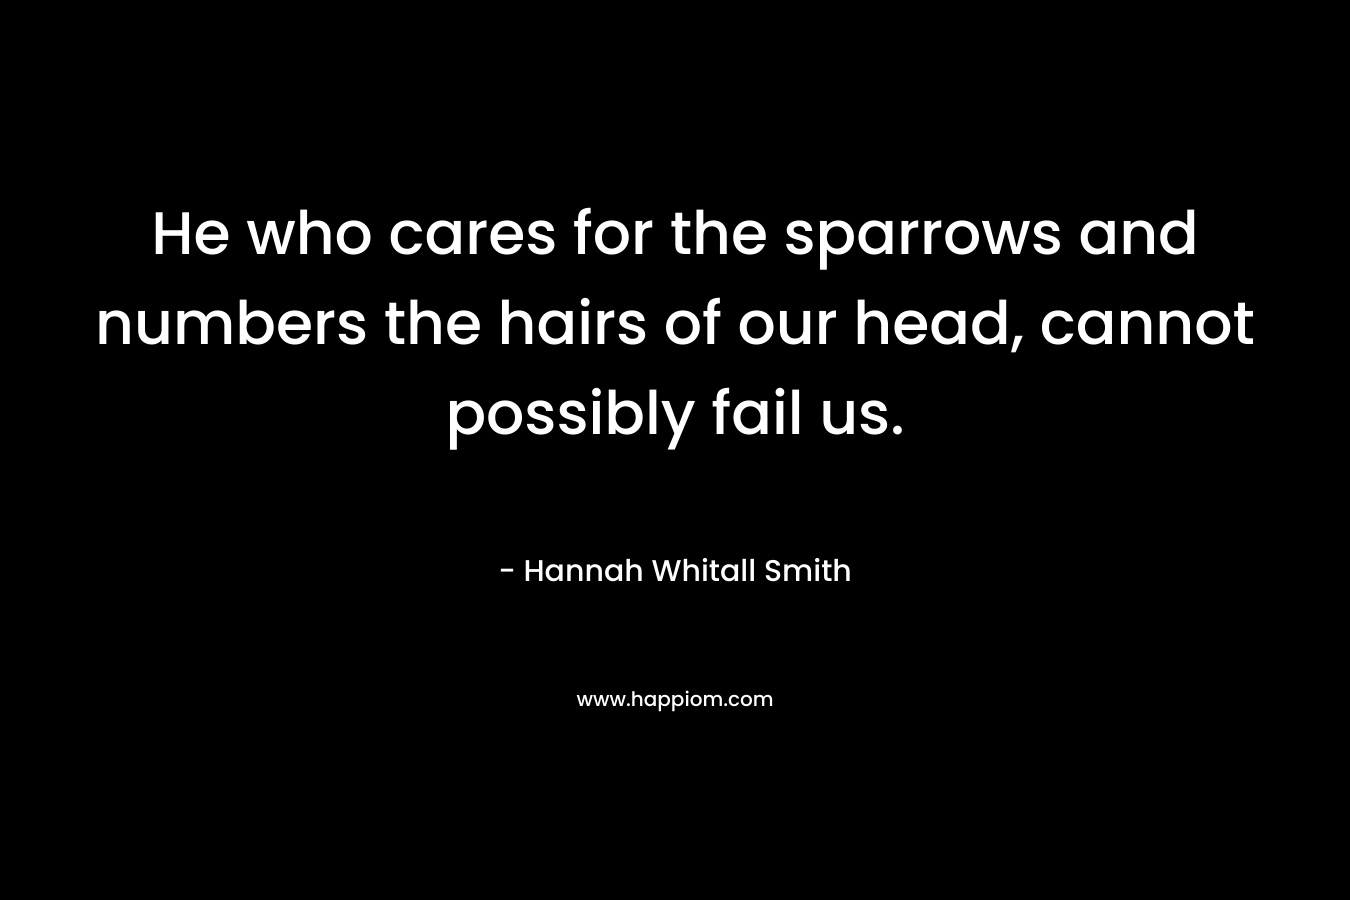 He who cares for the sparrows and numbers the hairs of our head, cannot possibly fail us.